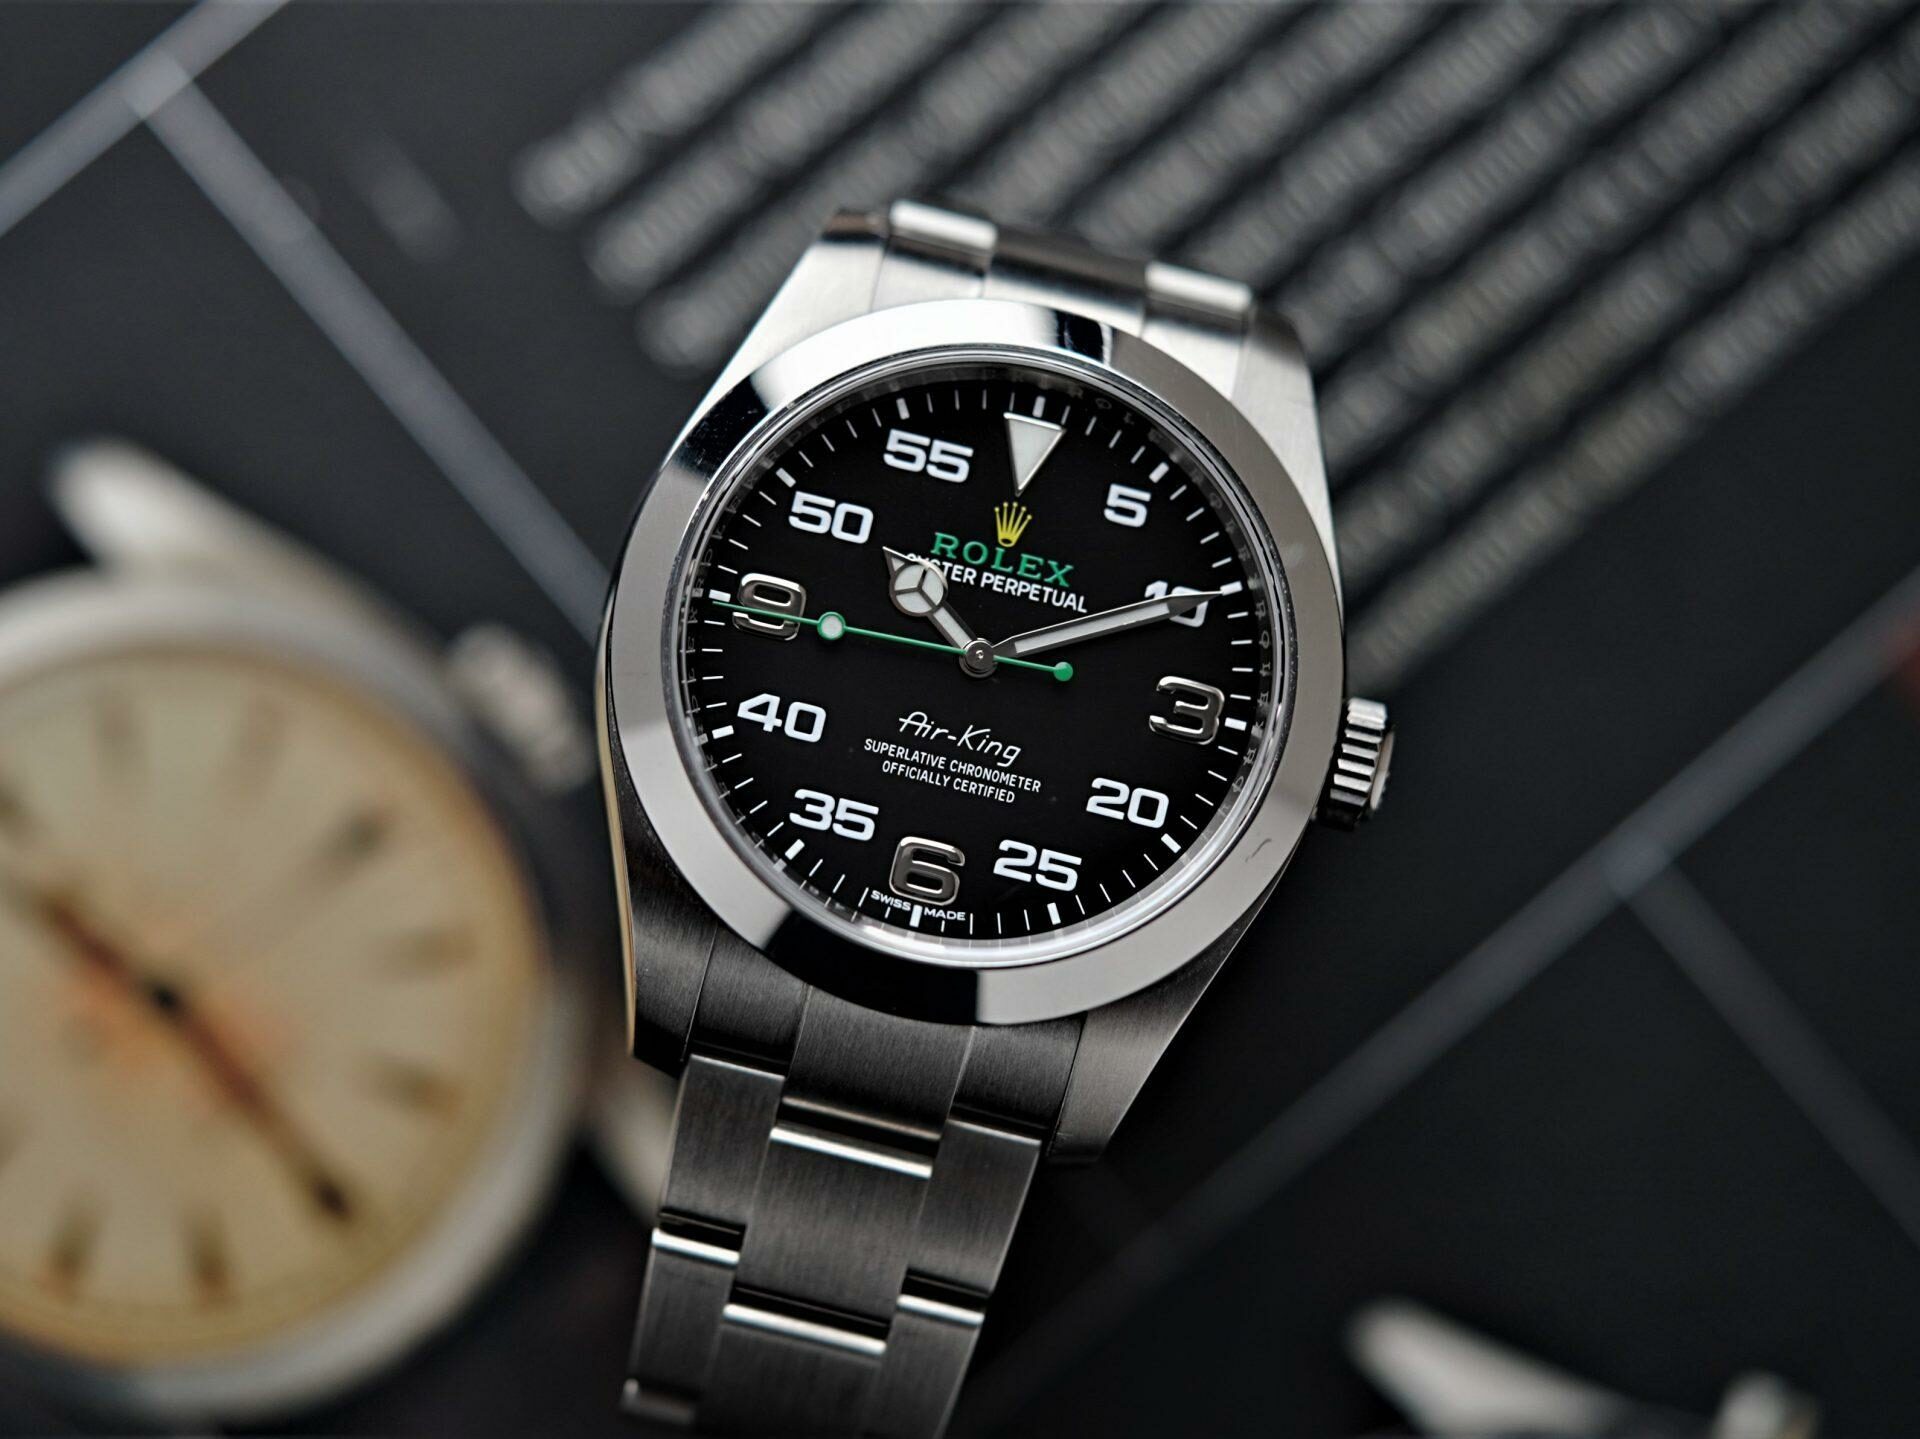 Rolex Air King Gen 1 watch pictured on an angle.